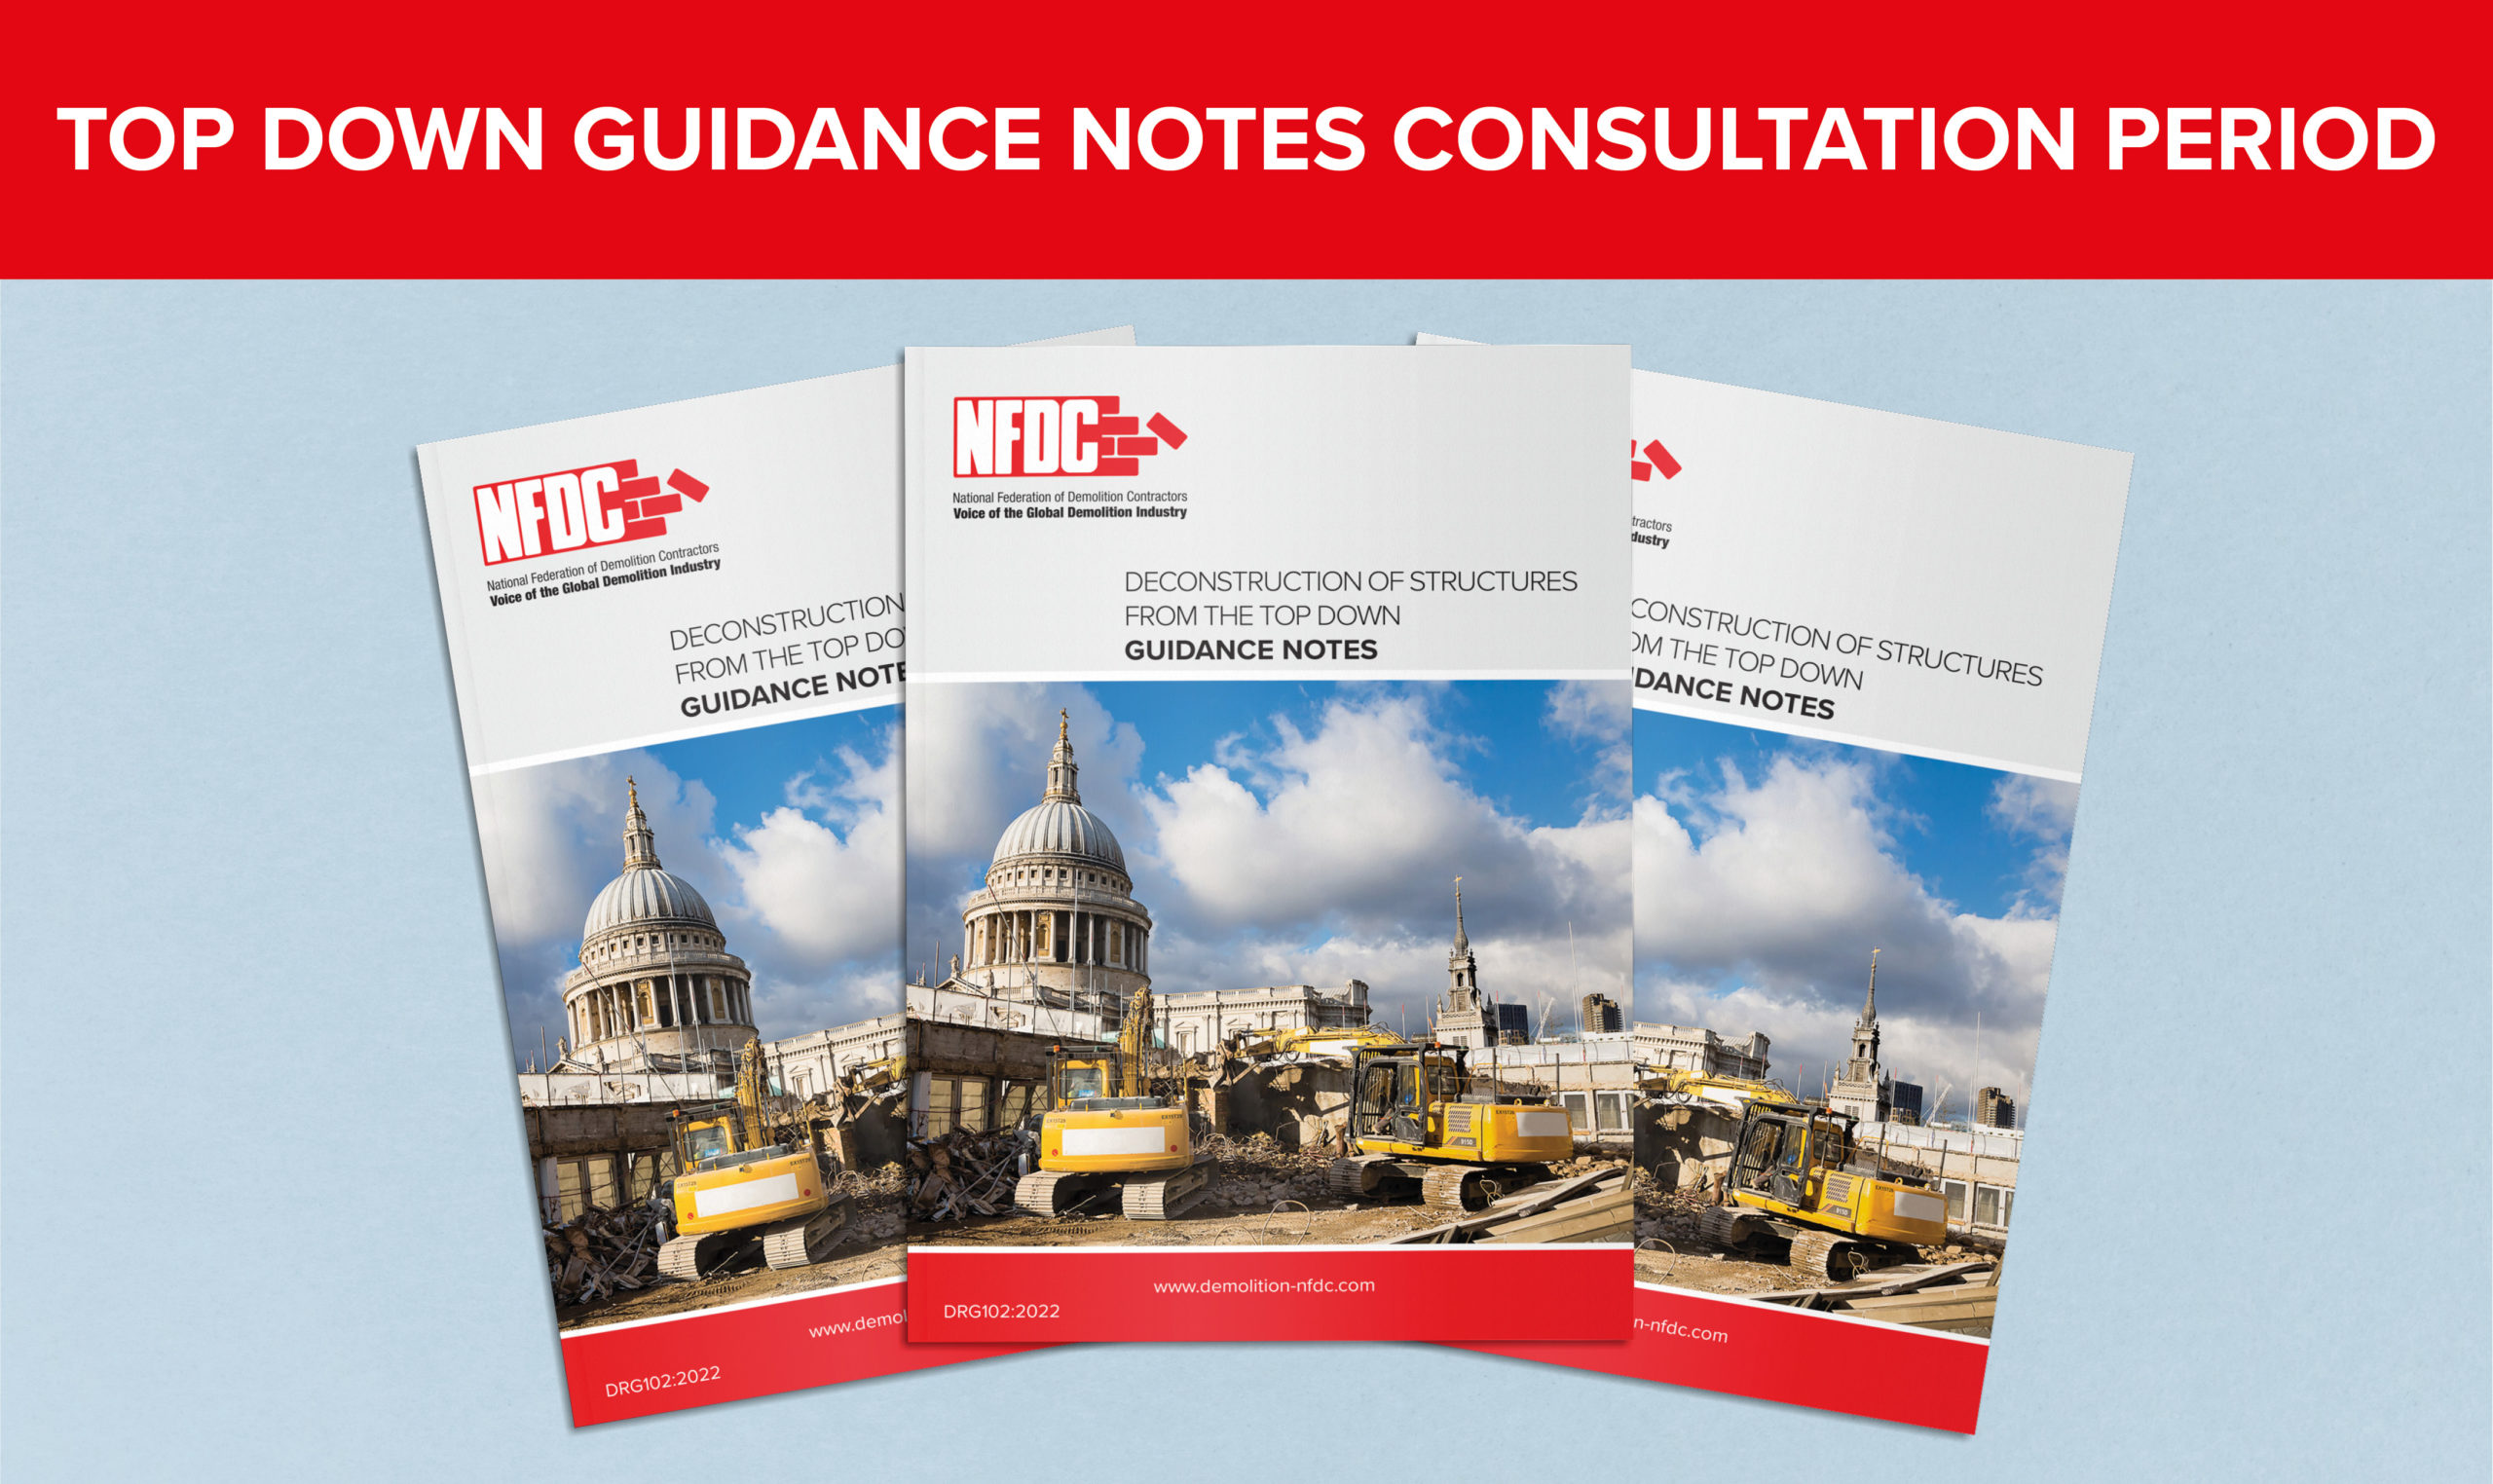 Top Down Guidance Notes Consultation Period